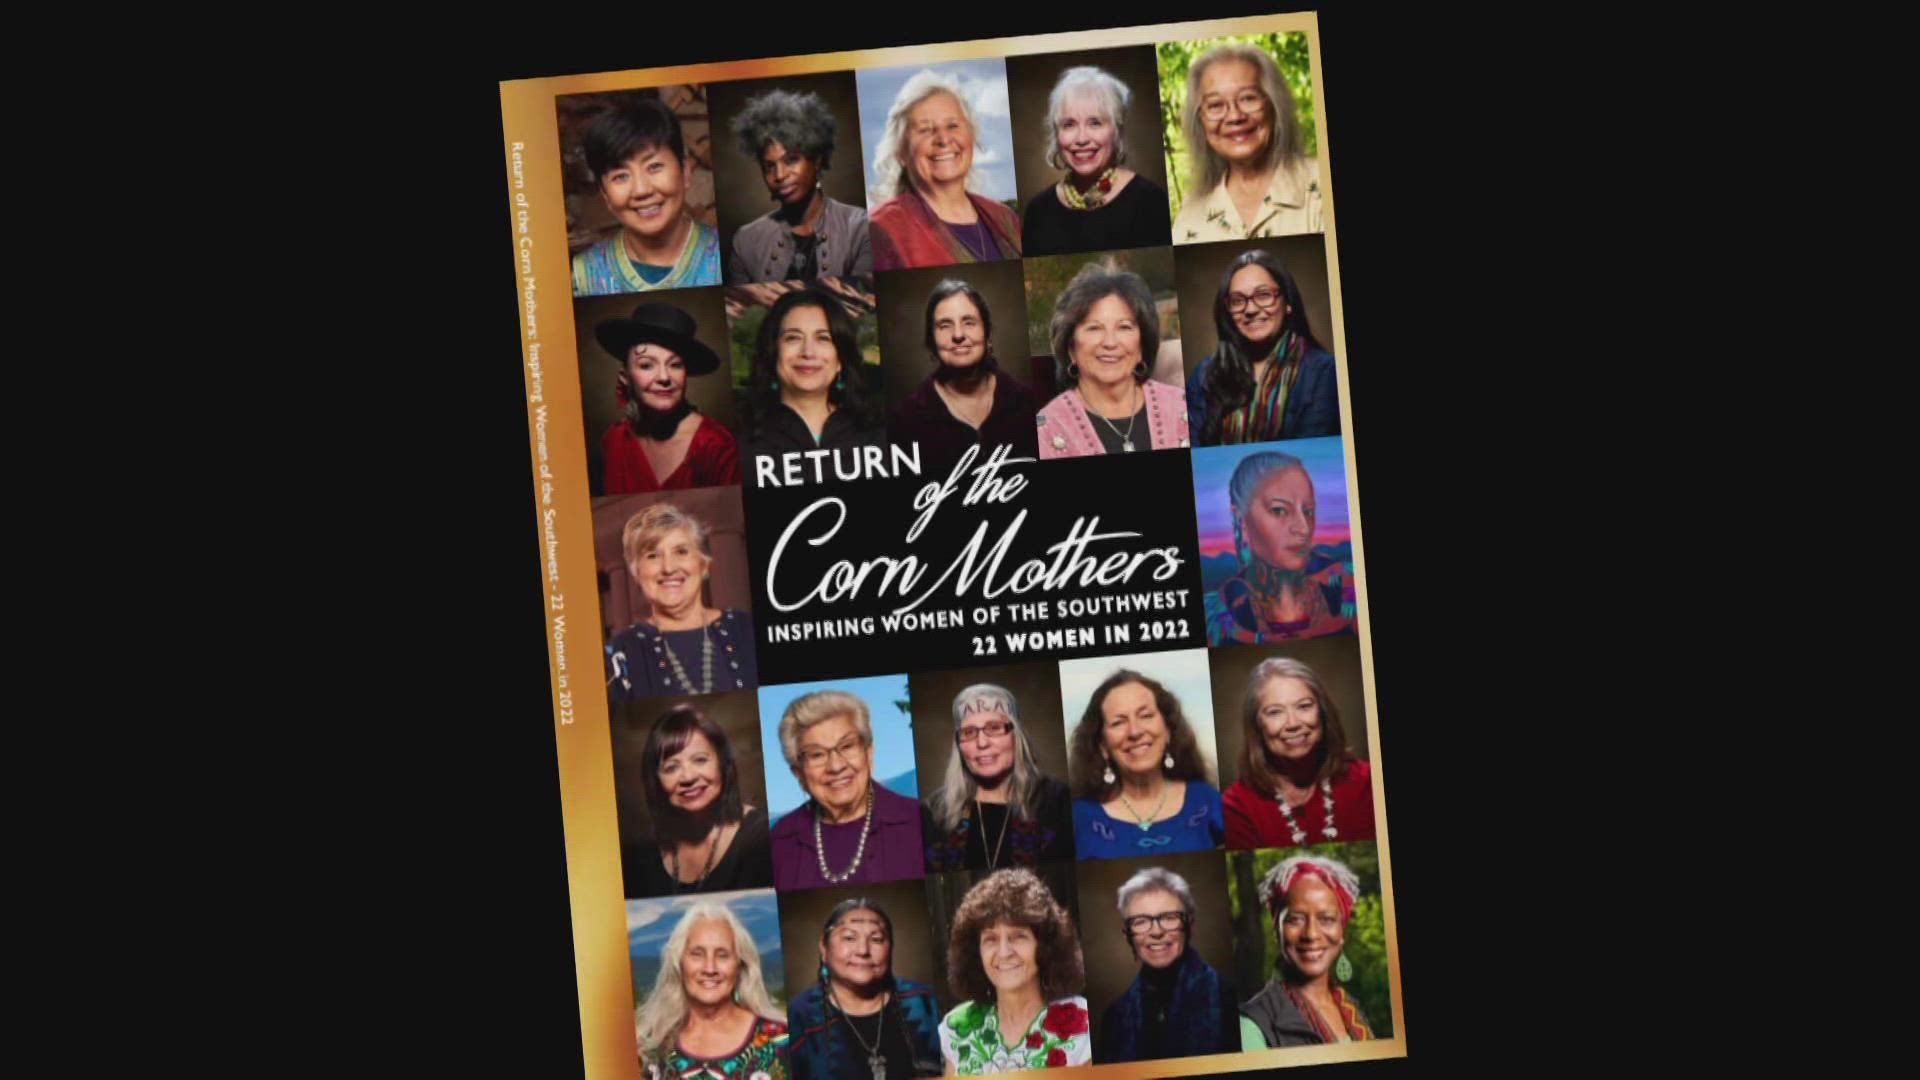 22 women will be honored next week for making significant impacts in their communities, and for embodying the spirit of the Corn Mother.